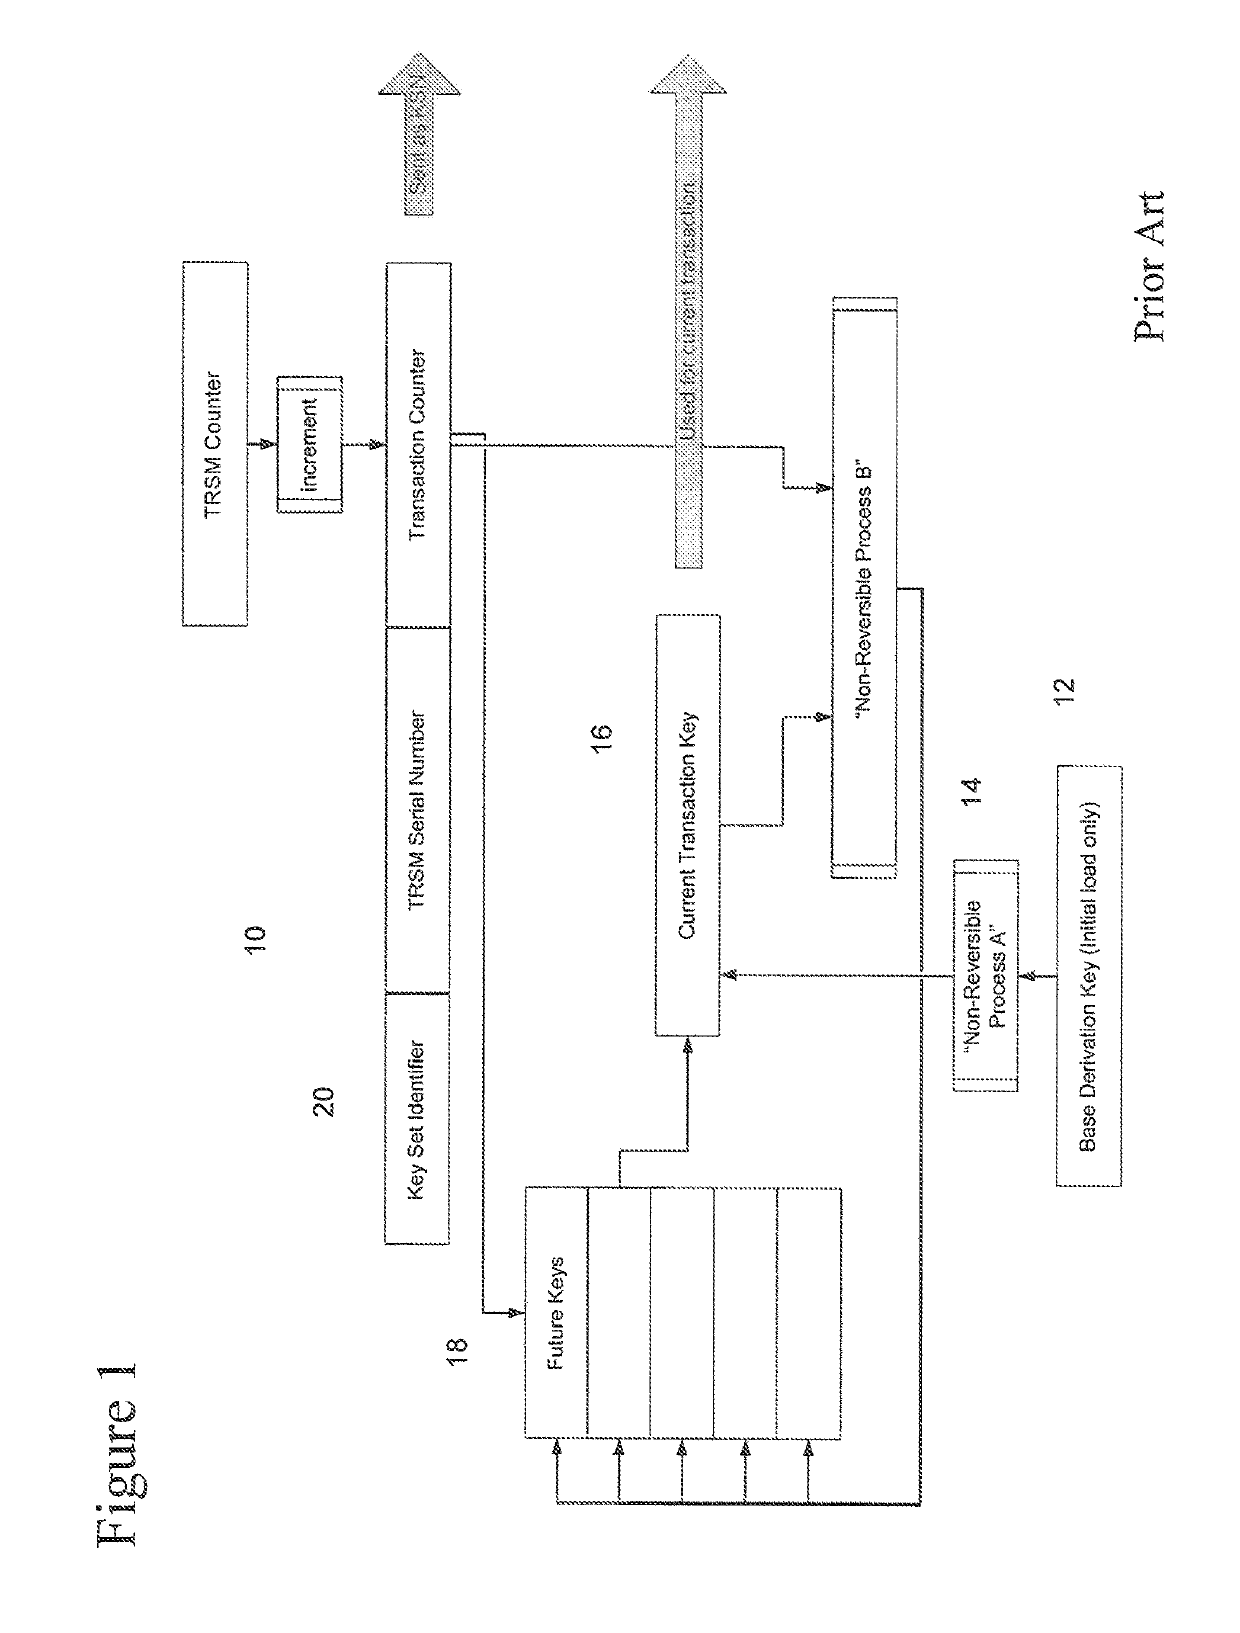 System, method and apparatus for network security monitoring, information sharing, and collective intelligence